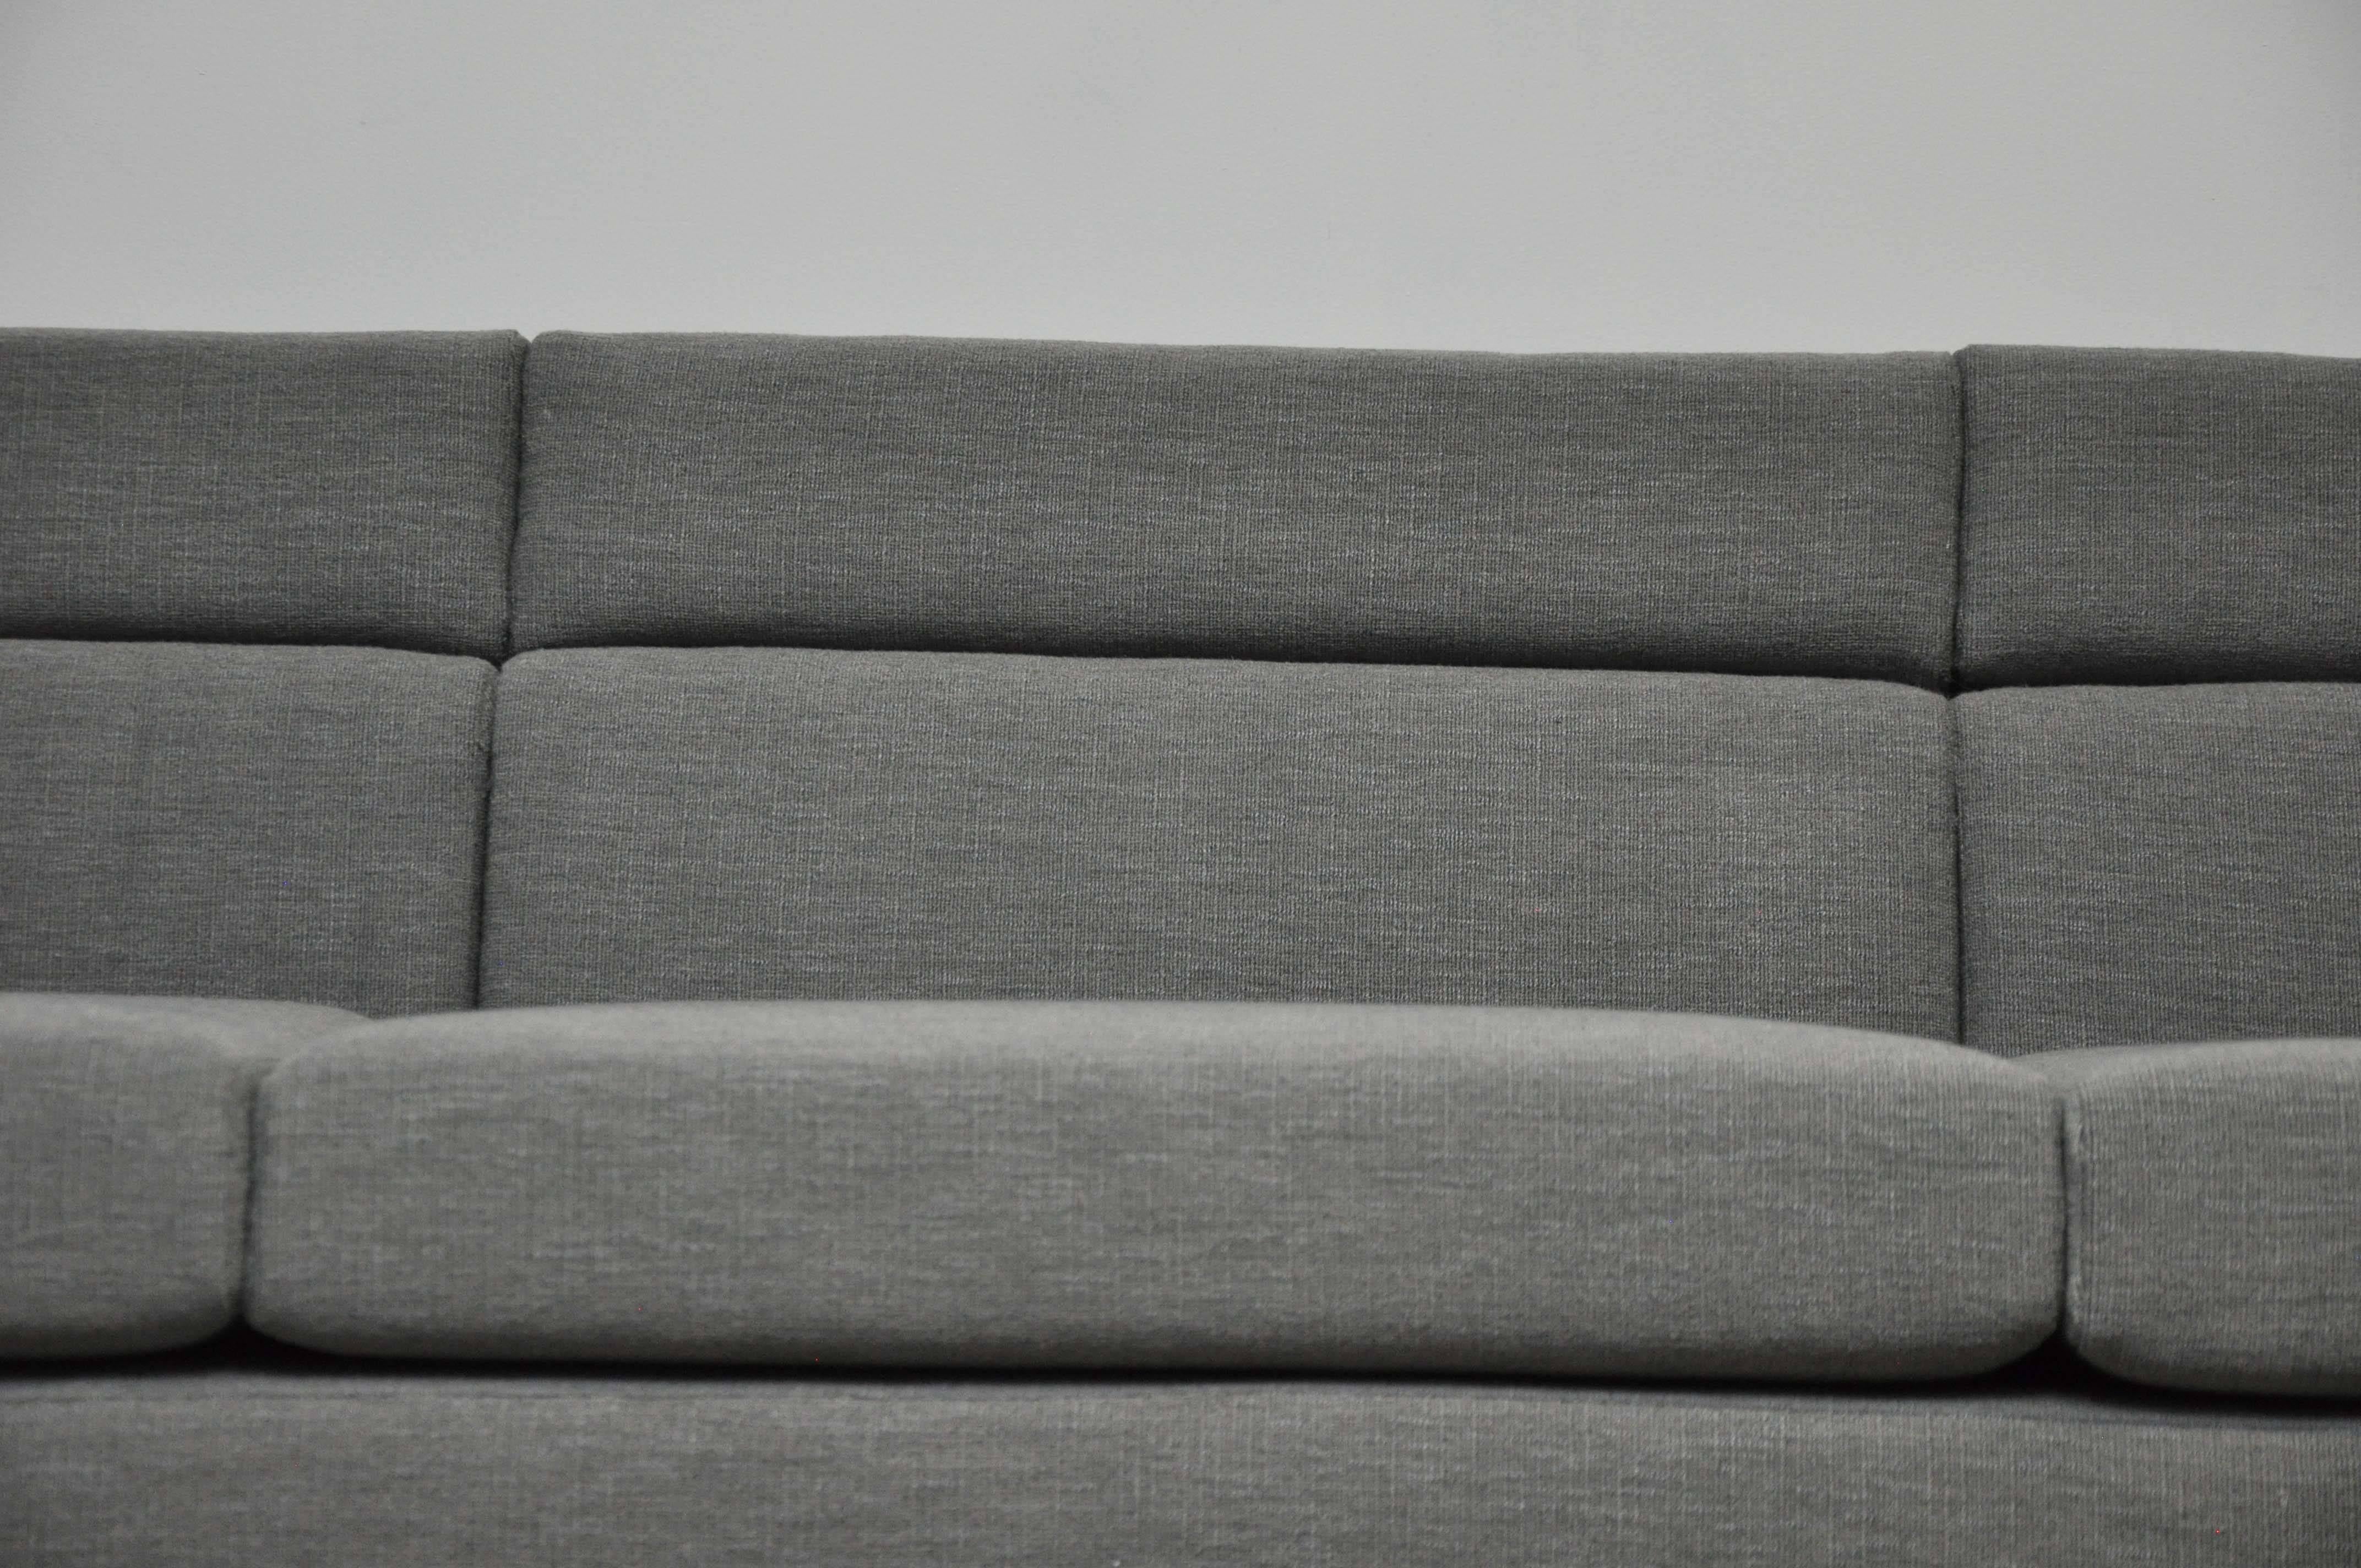 Channel sofa model 7140 designed by Roger Sprunger for Dunbar. Fully restored with new textured grey fabric.